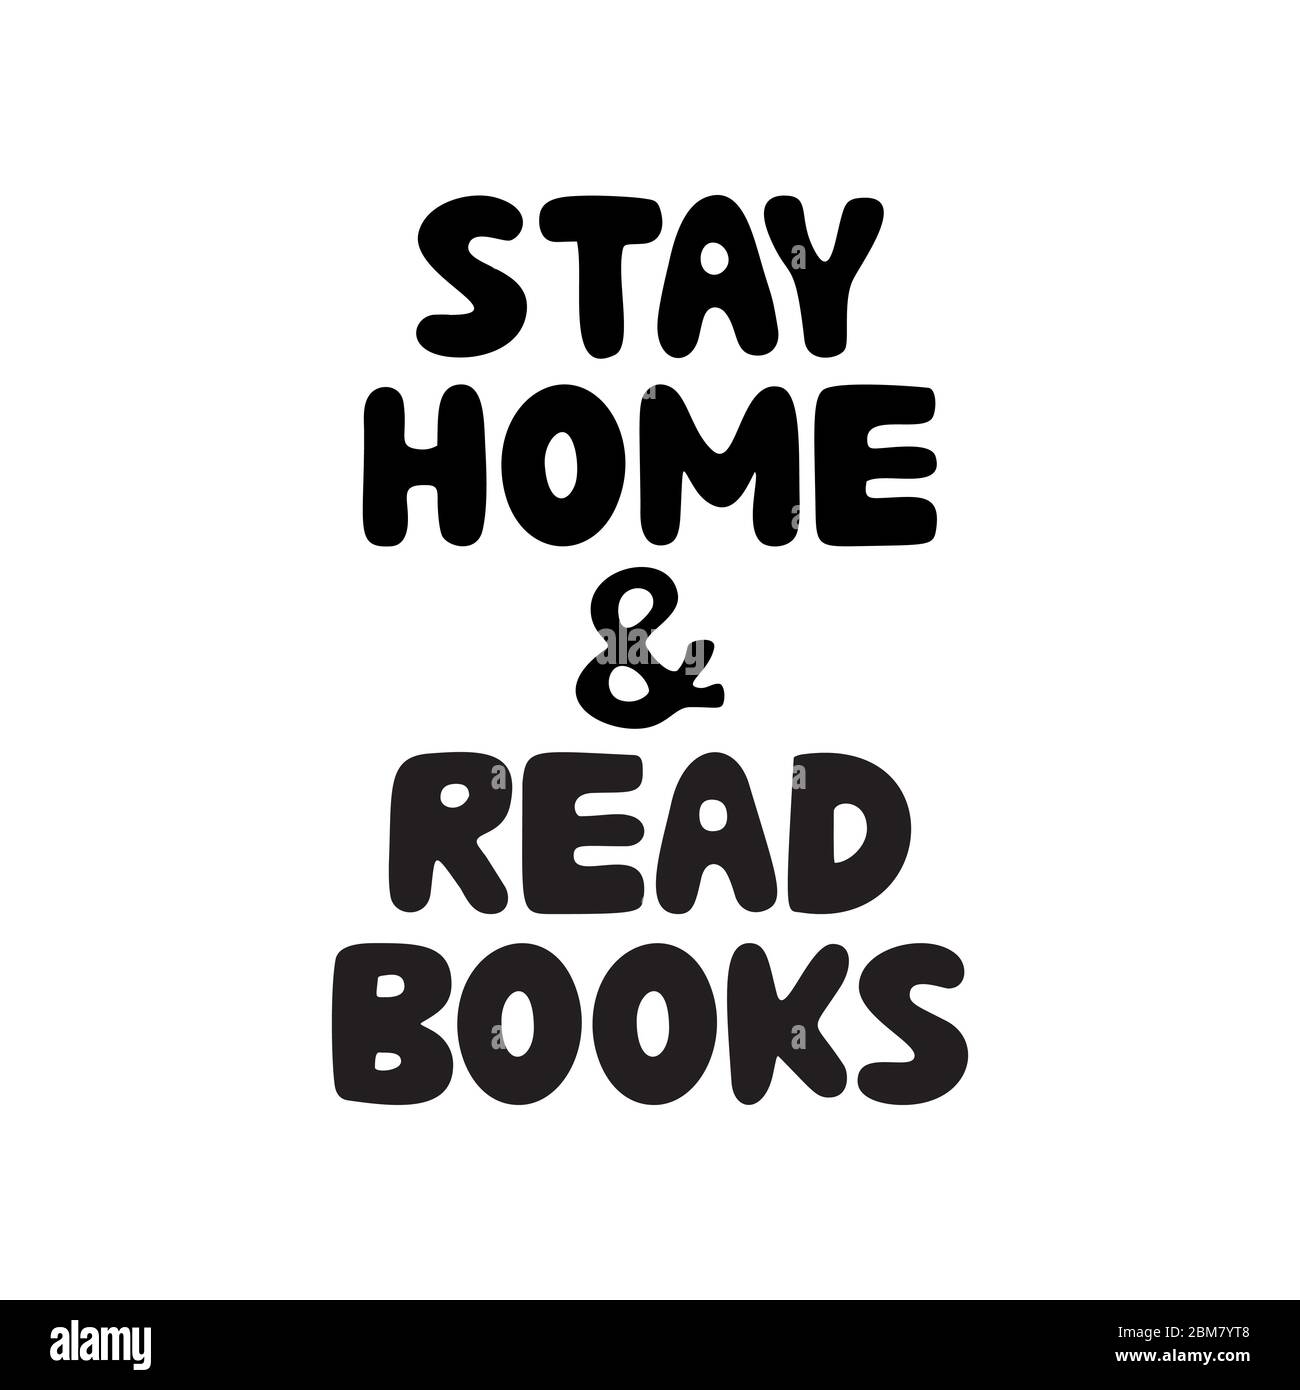 Stay home and read books. Cute hand drawn doodle bubble lettering. Isolated on white background. Vector stock illustration. Stock Vector